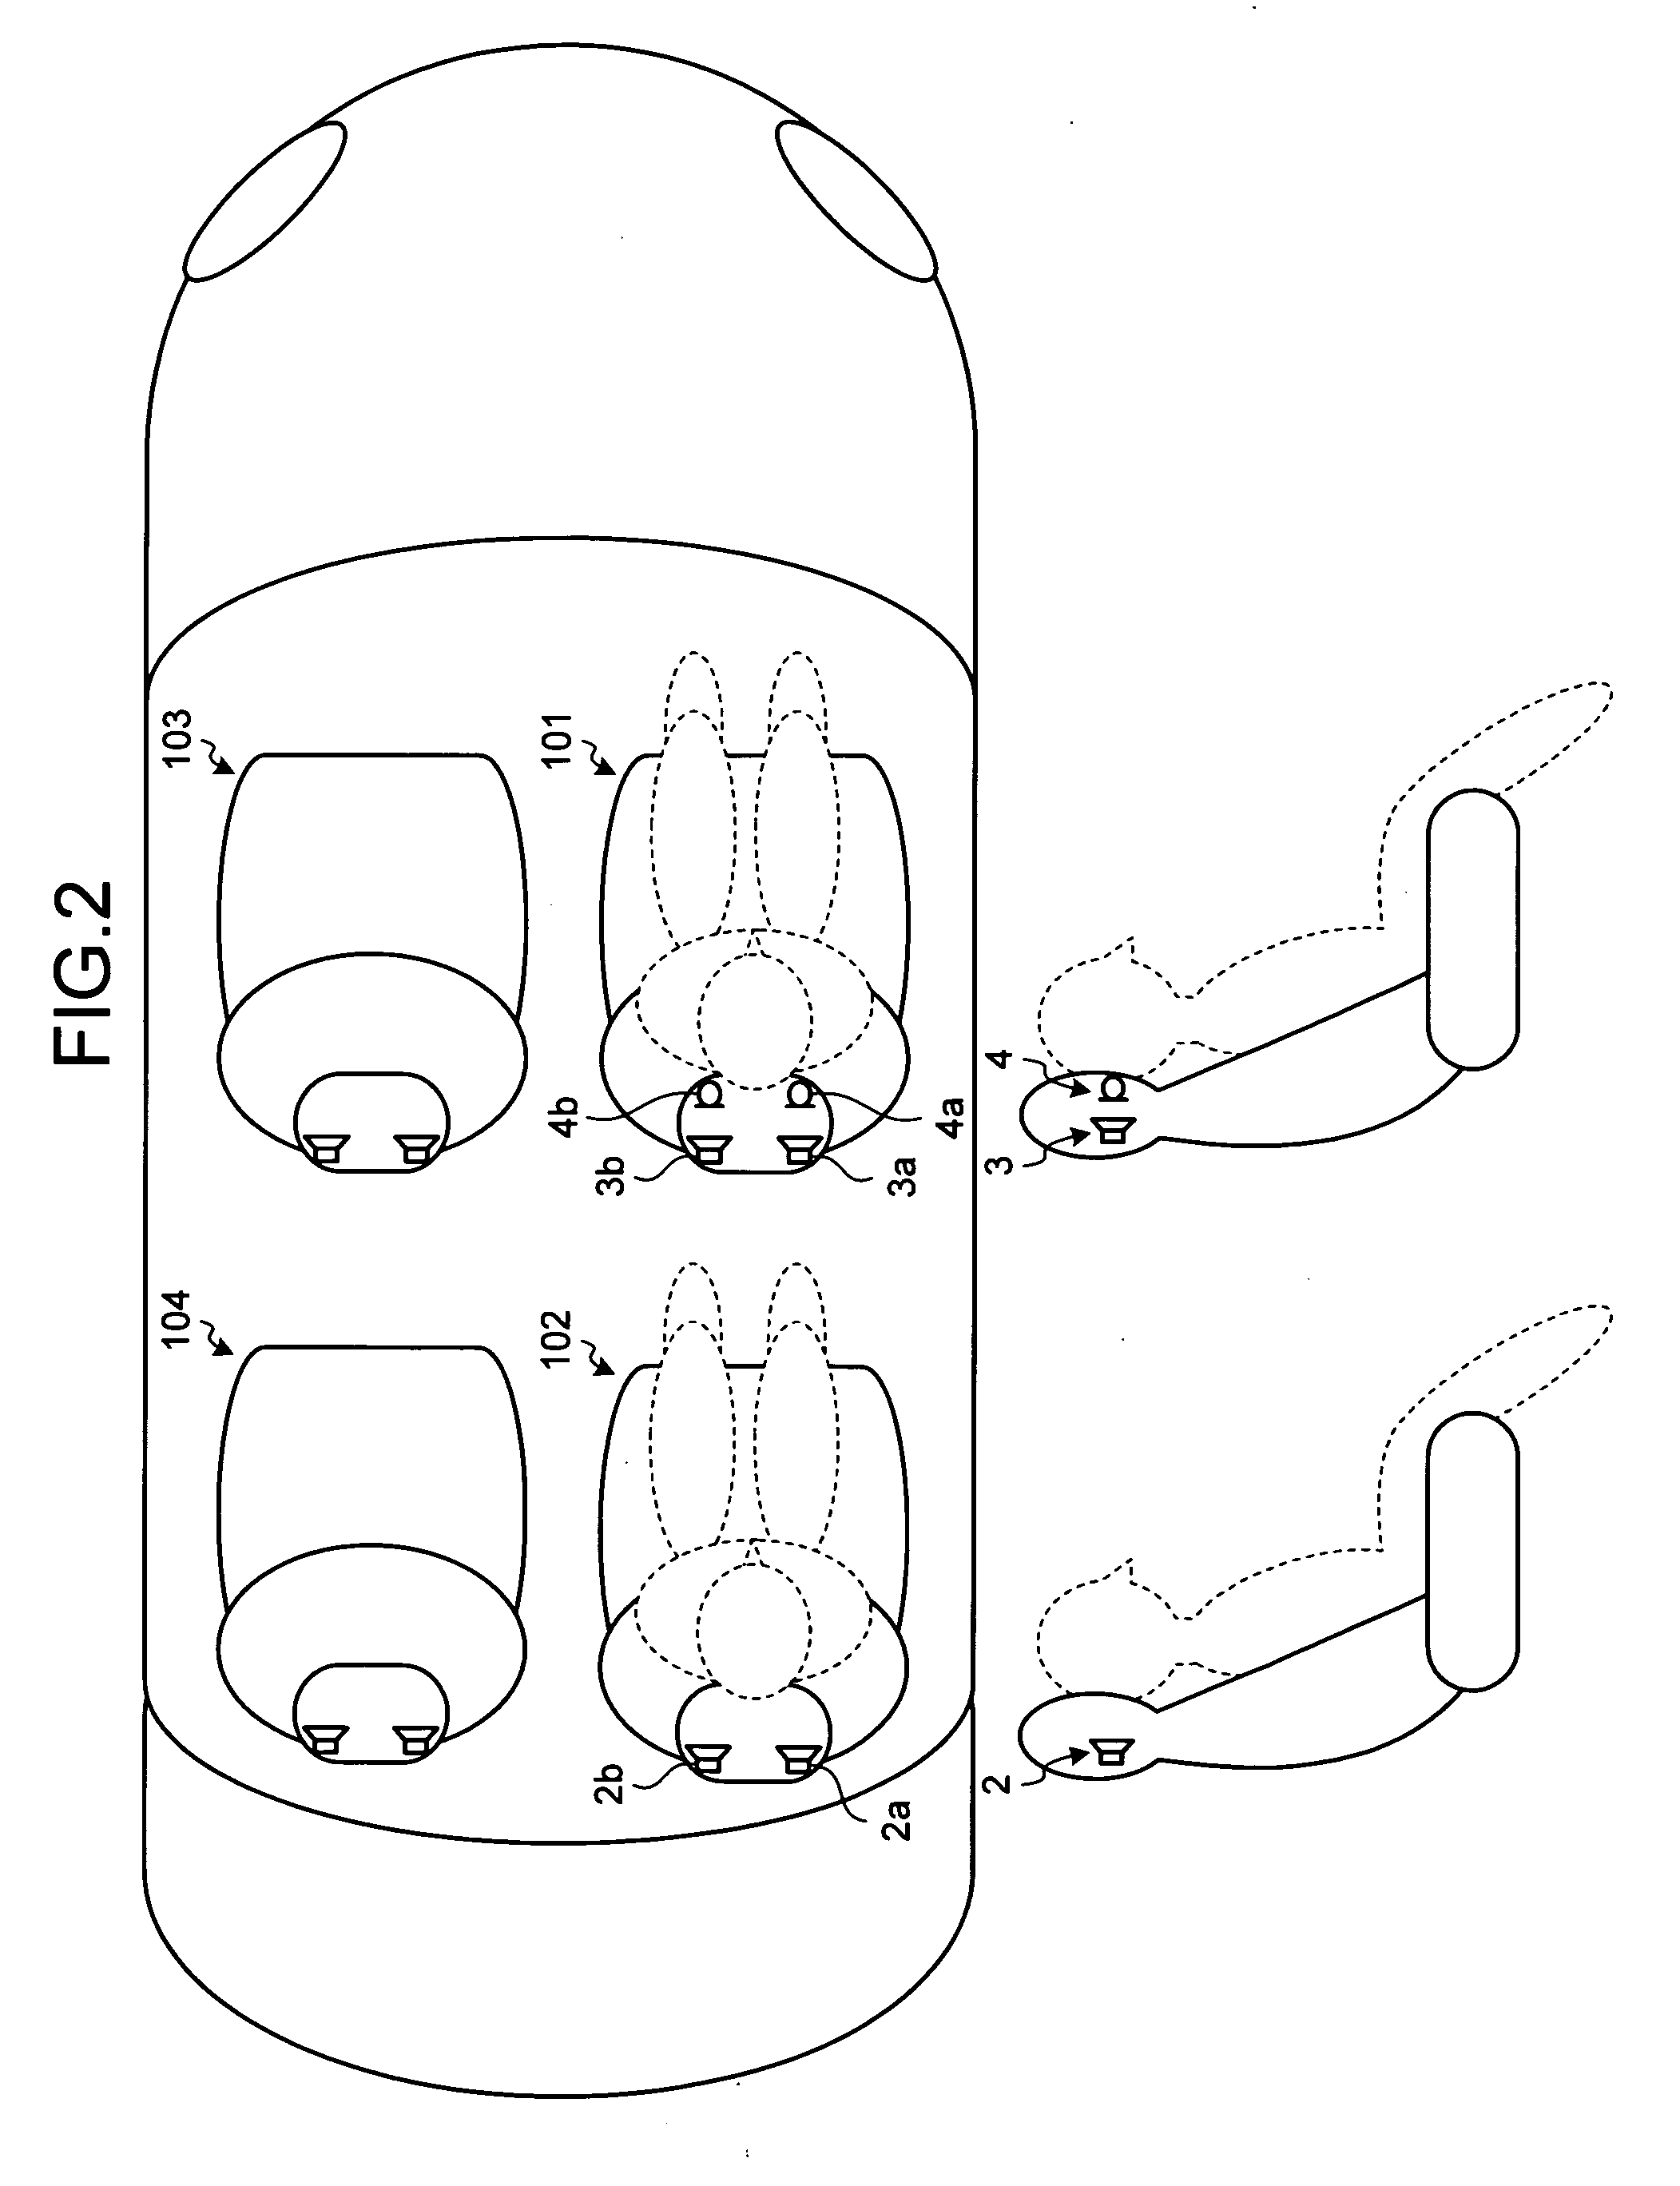 Acoustic system for providing individual acoustic environment